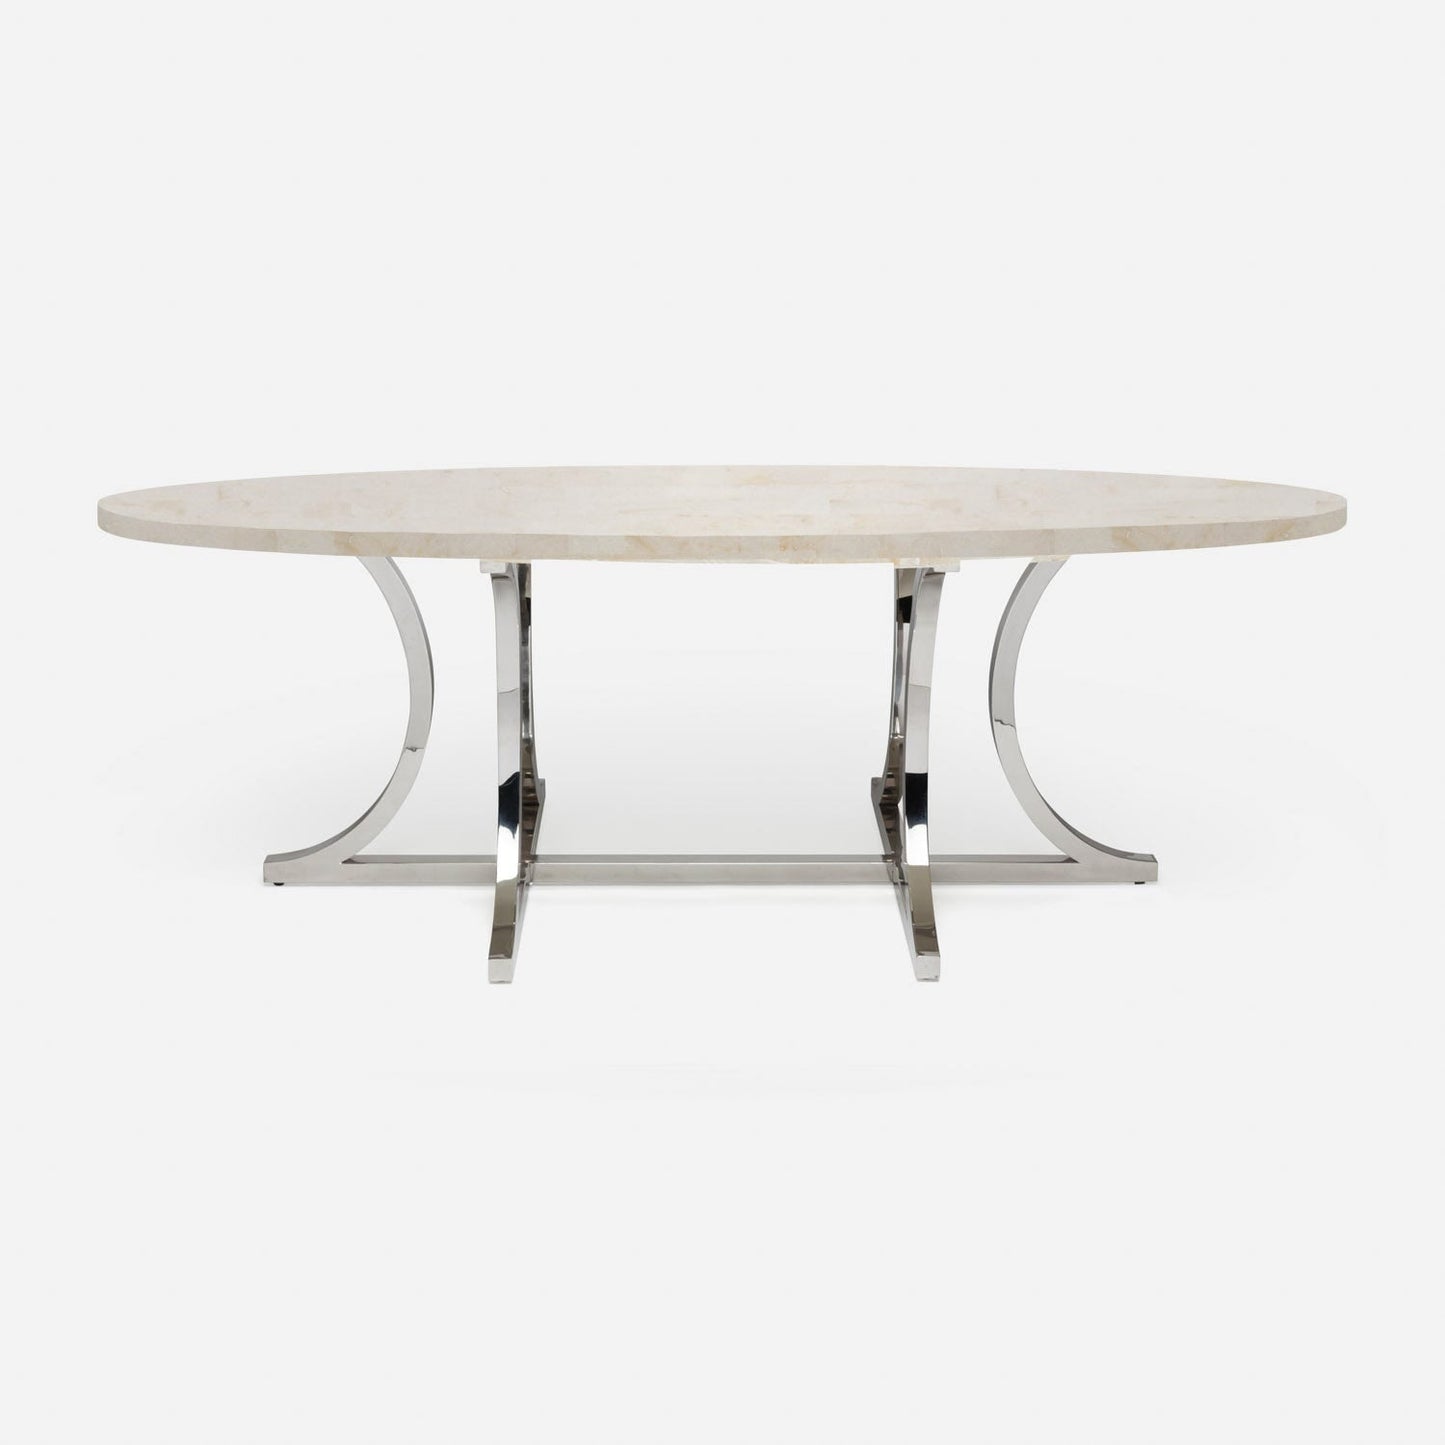 Made Goods Leighton 84" x 42" x 30" Polished Silver Steel Dinning Table With Oval Ice Crystal Stone Table Top